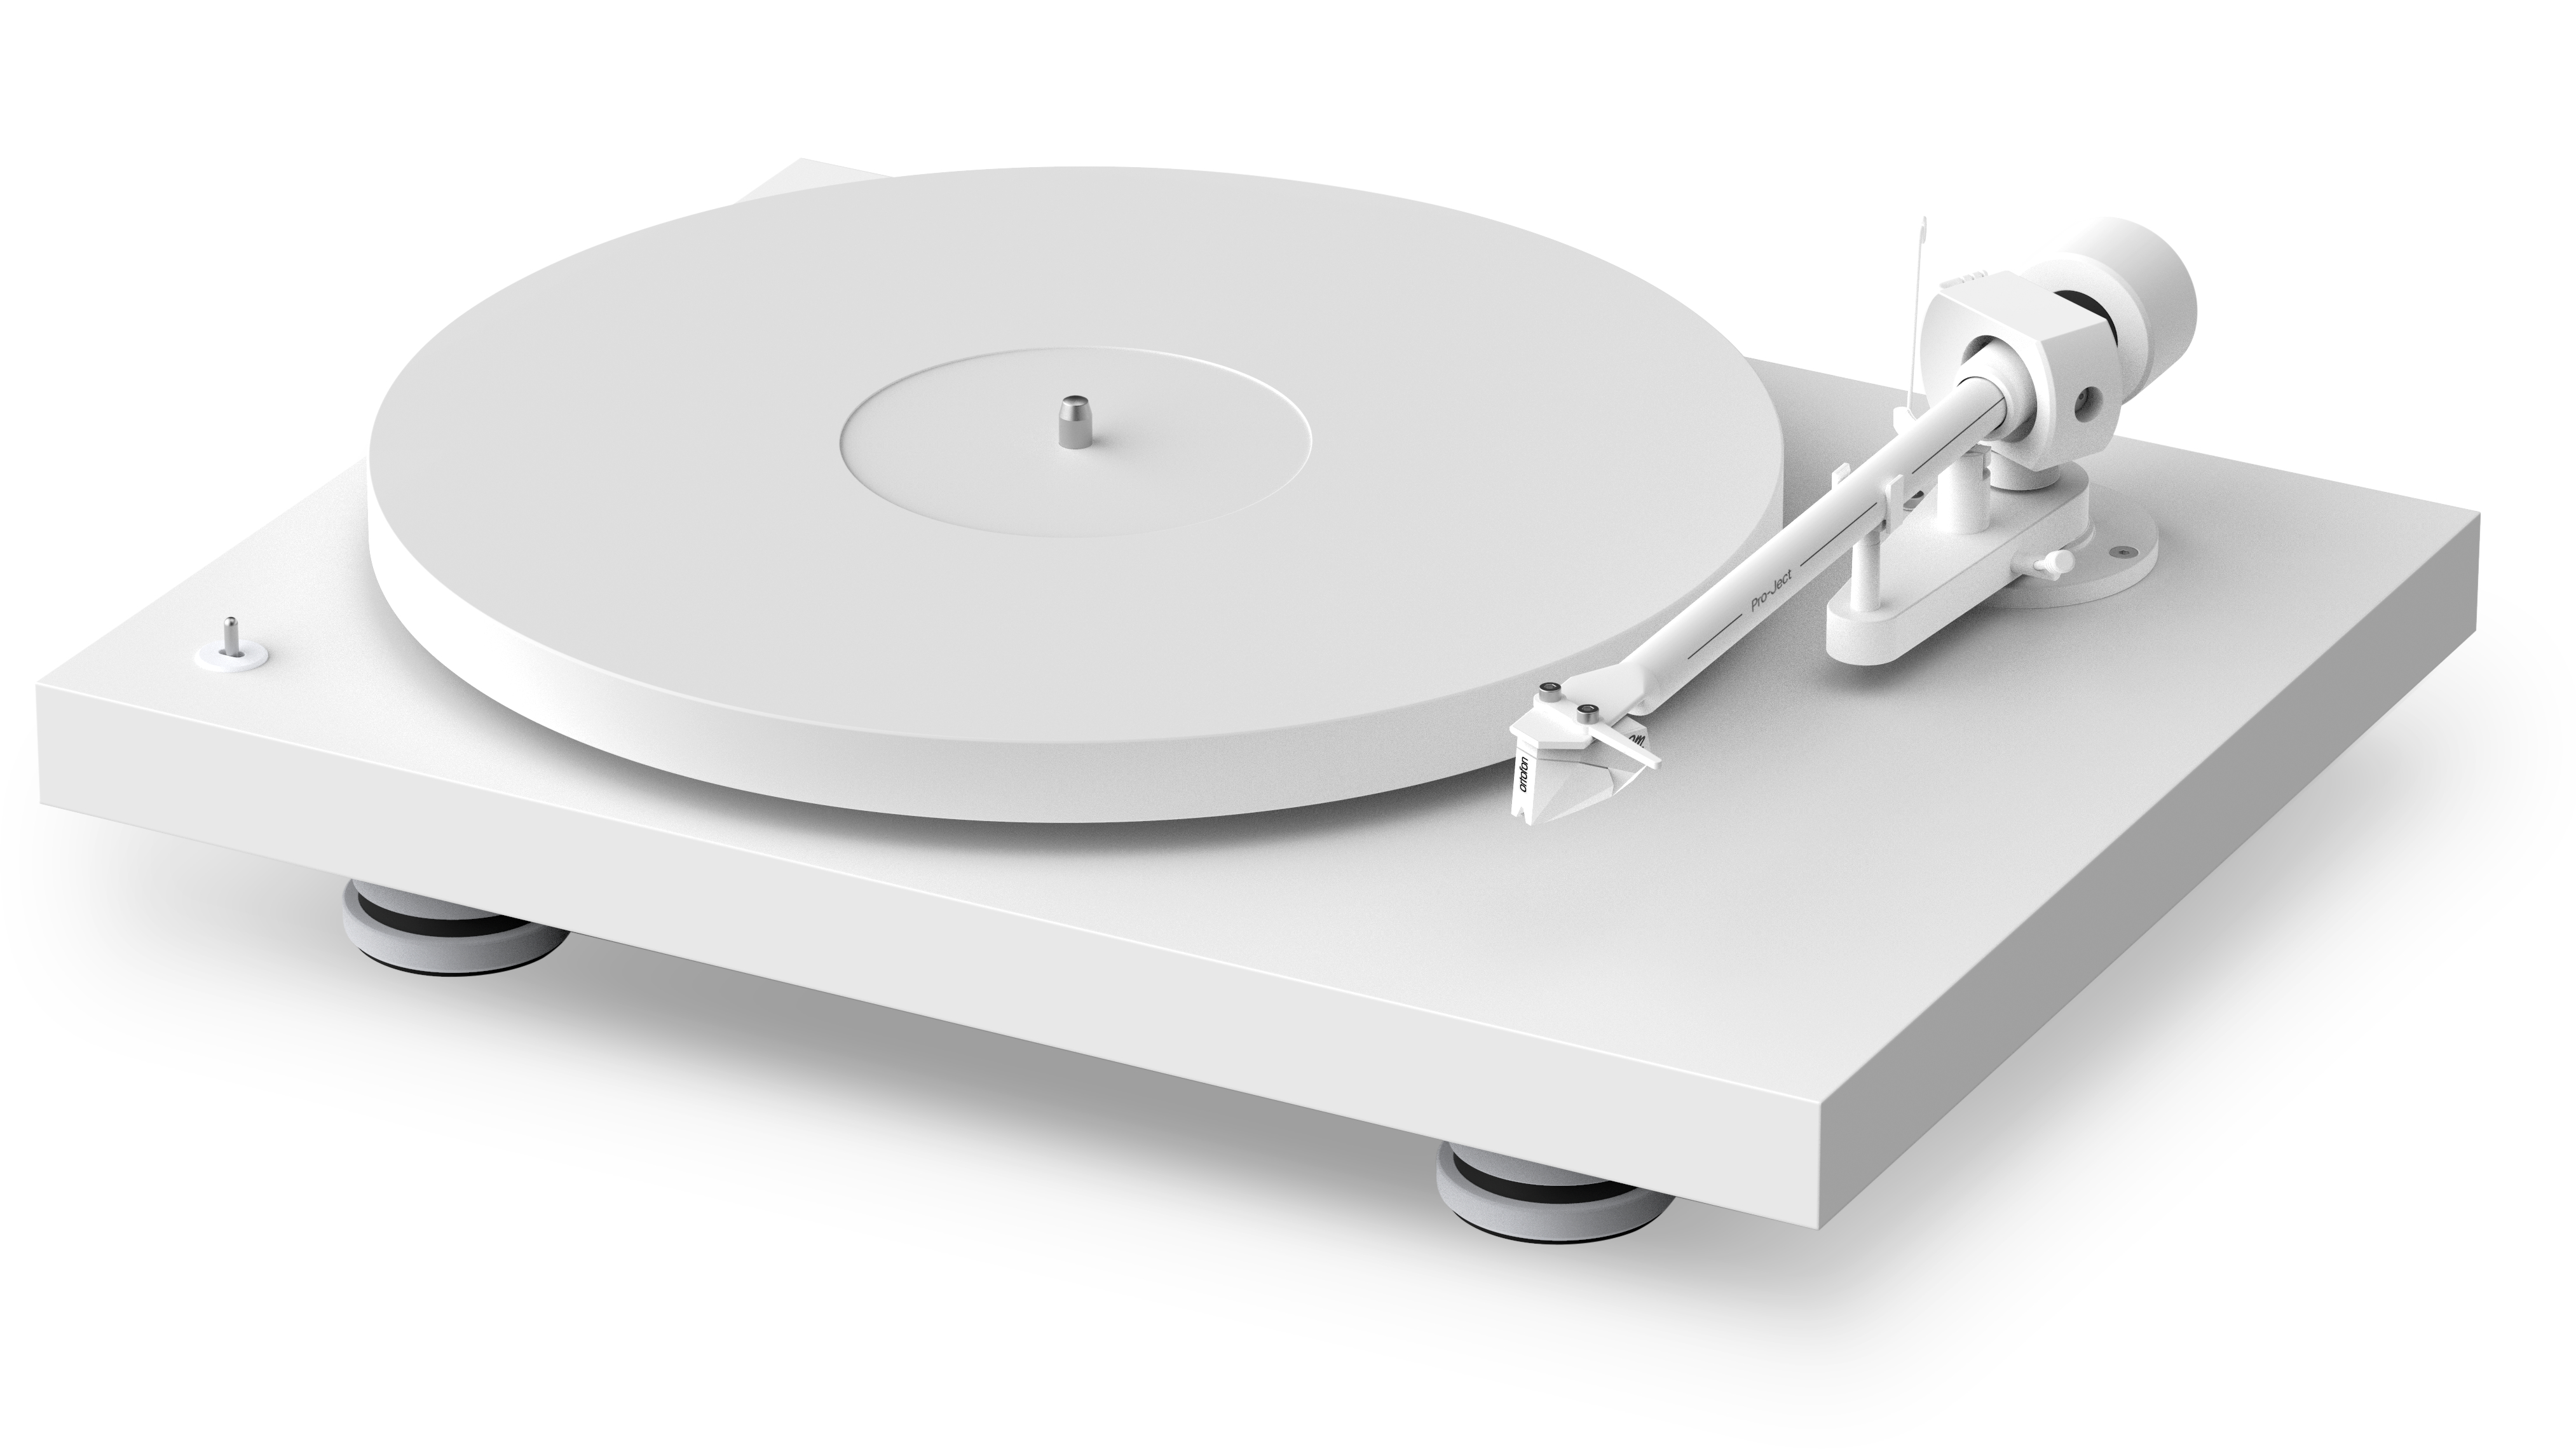 Pro-Ject's super-stylish white turntable takes me back to days of